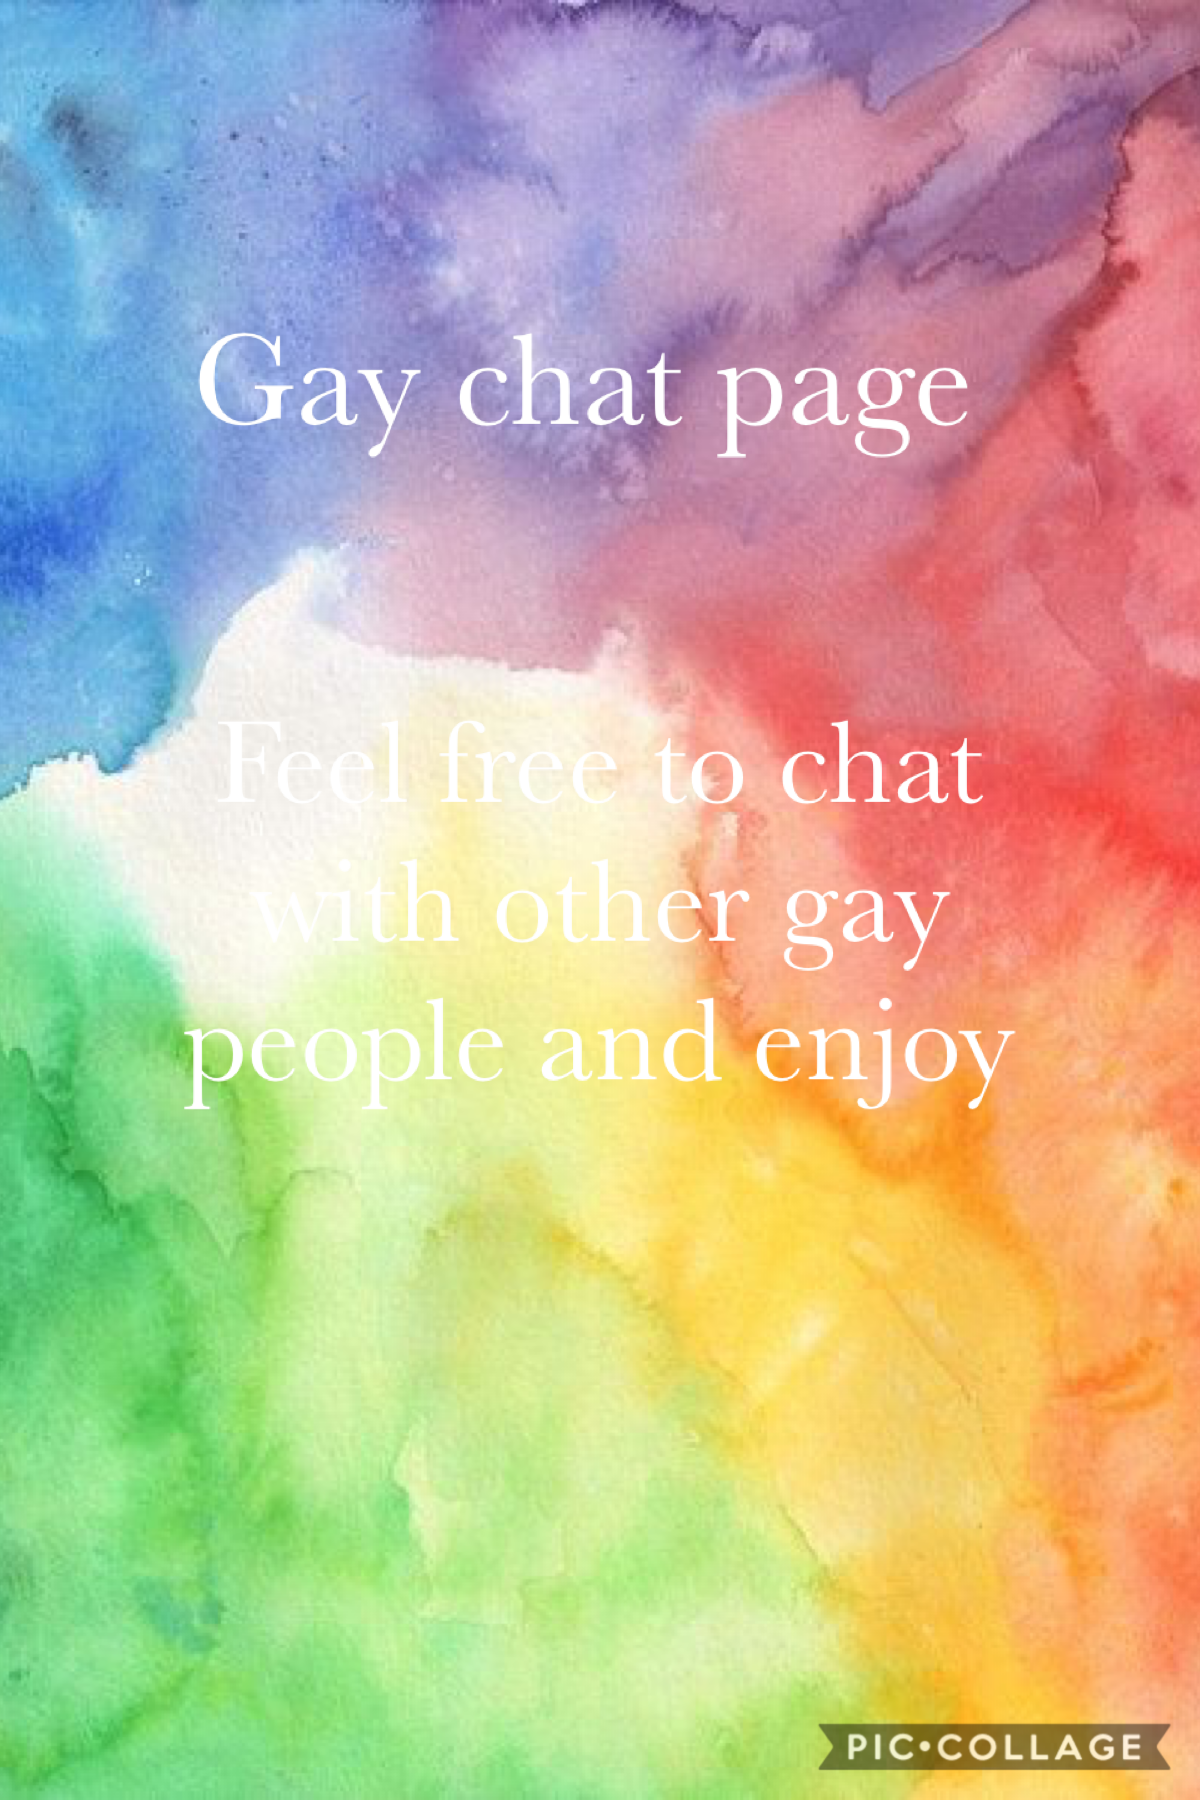 Gay chat page 